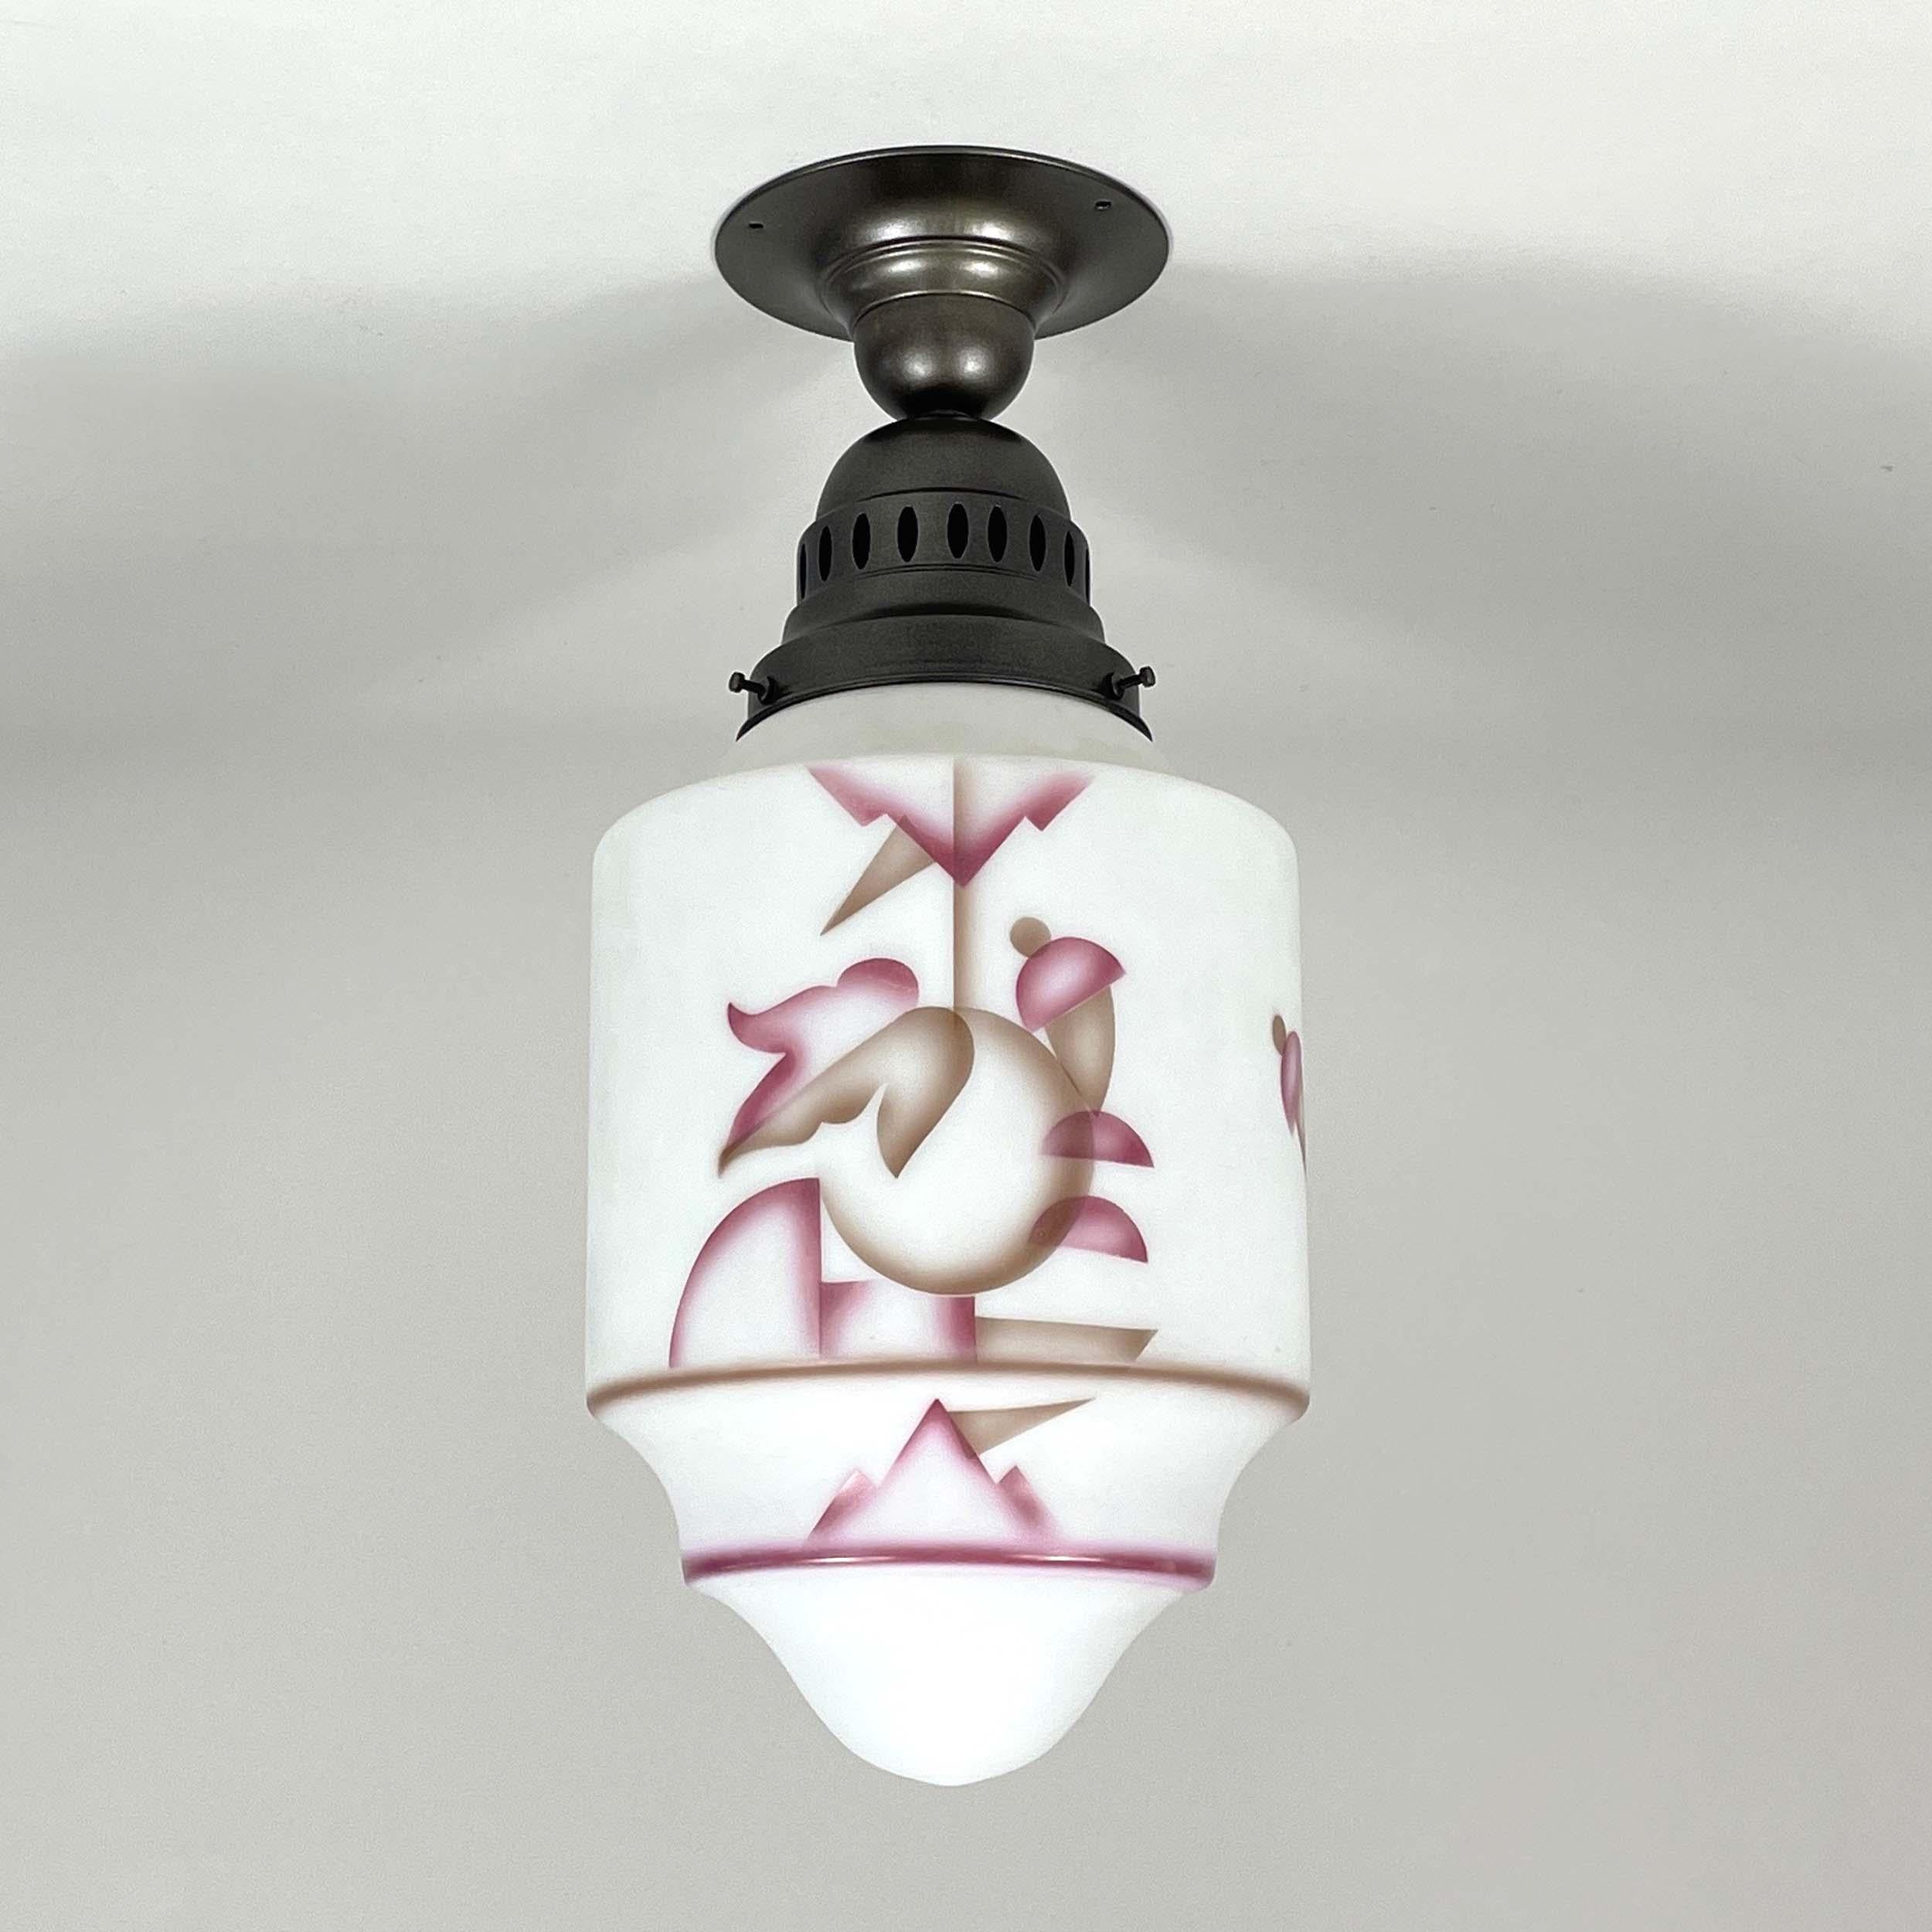 This elegant flush mount was designed and manufactured in Germany in the 1930s during the Bauhaus period. It features a white frosted glass lampshade with rose and light brown colored paintbrush decor and bronzed/burnished hardware.

The light has